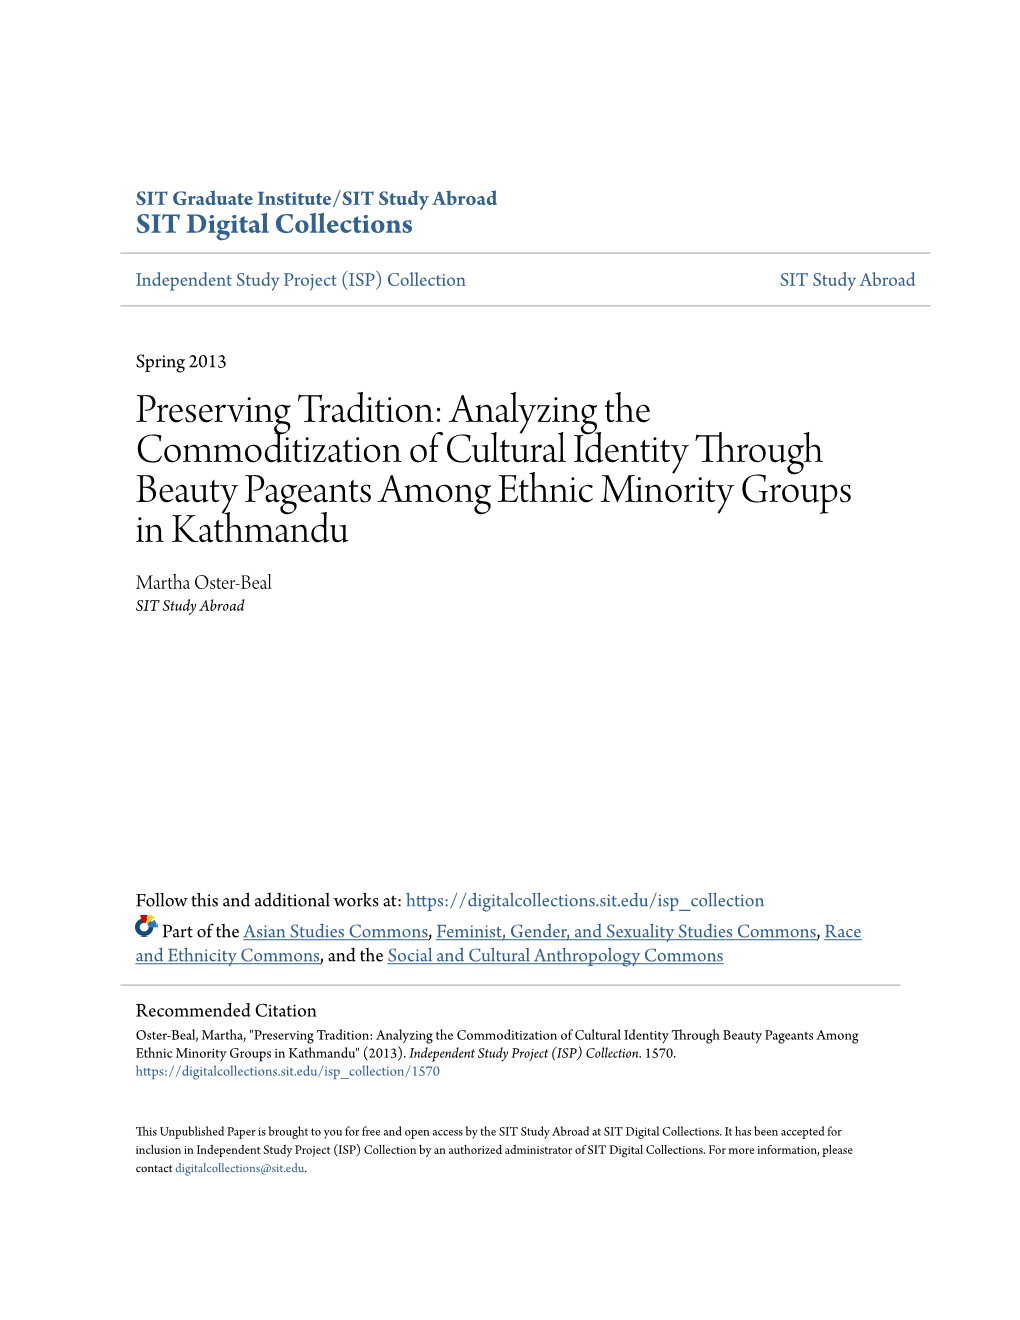 Analyzing the Commoditization of Cultural Identity Through Beauty Pageants Among Ethnic Minority Groups in Kathmandu Martha Oster-Beal SIT Study Abroad